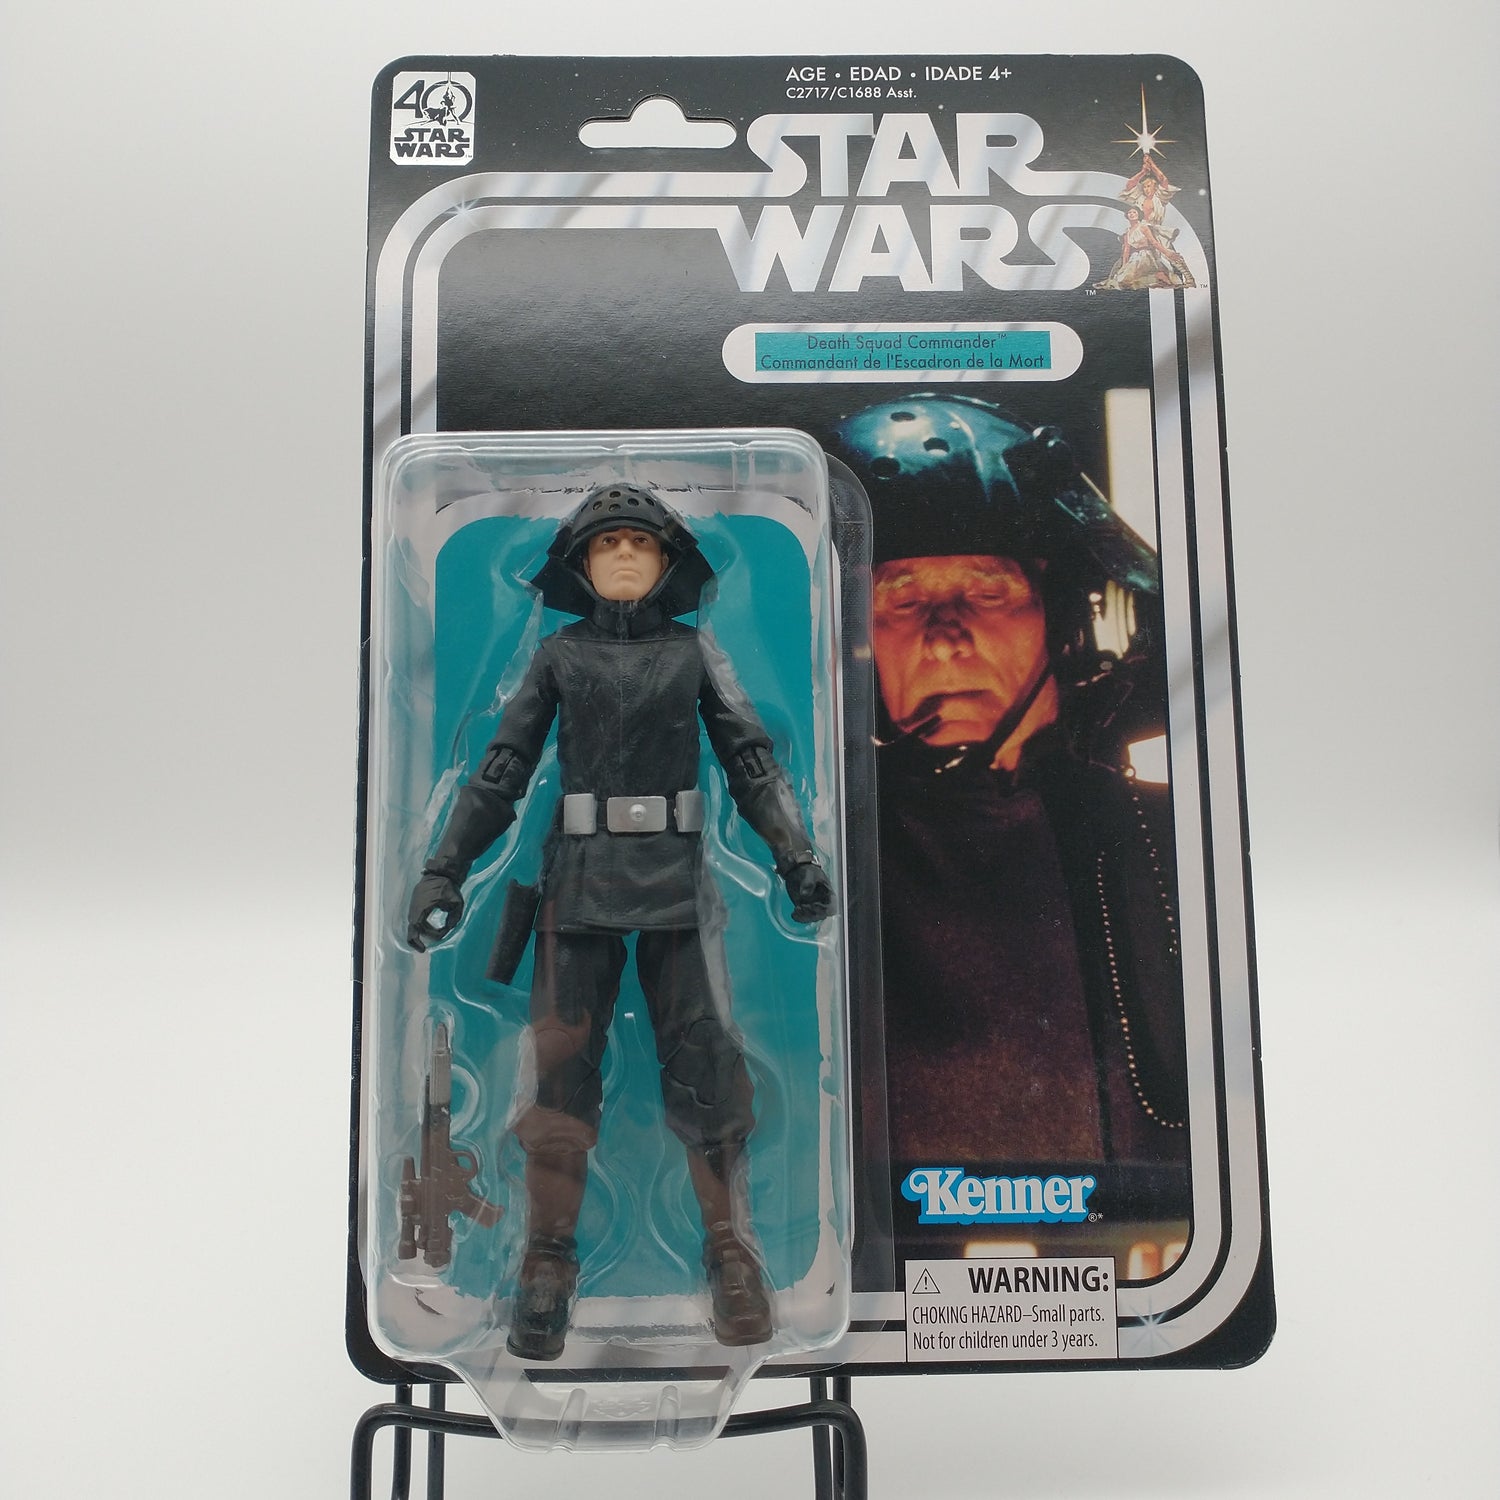 The front of the cart and bubble are sealed and undamaged. The action figure inside is wearing black clothing with a silver belt and a black mushroom shaped hat.